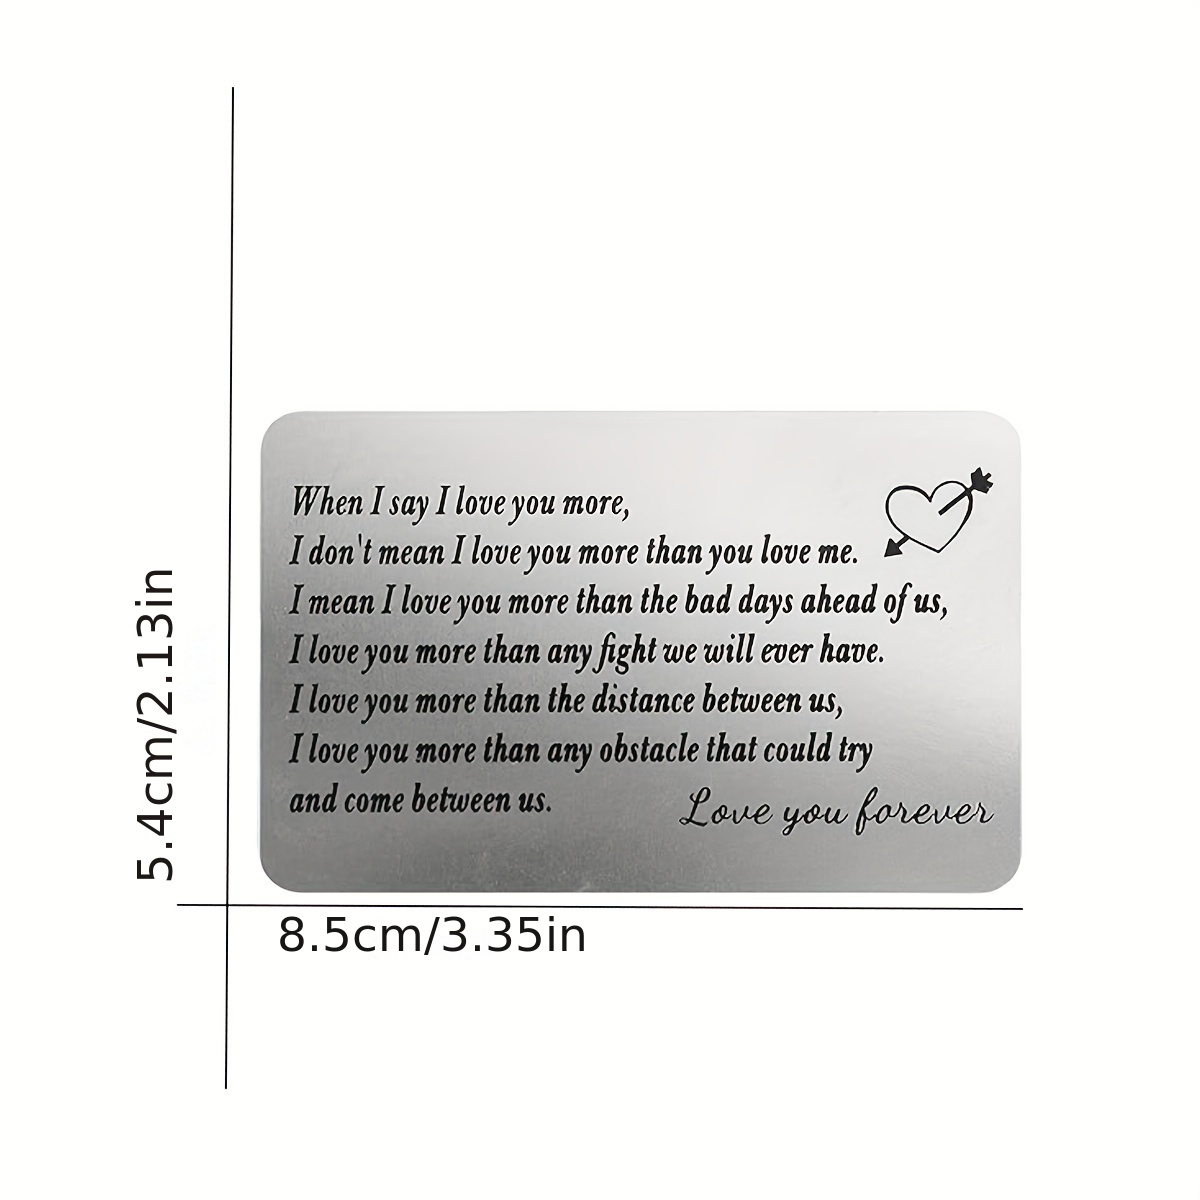 1pc, Engraved Wallet Card Insert Suitable For Husband Or Boyfriend - Love  You Forever - Romantic Love Message Metal Card From Wife Or Girlfriend Suita